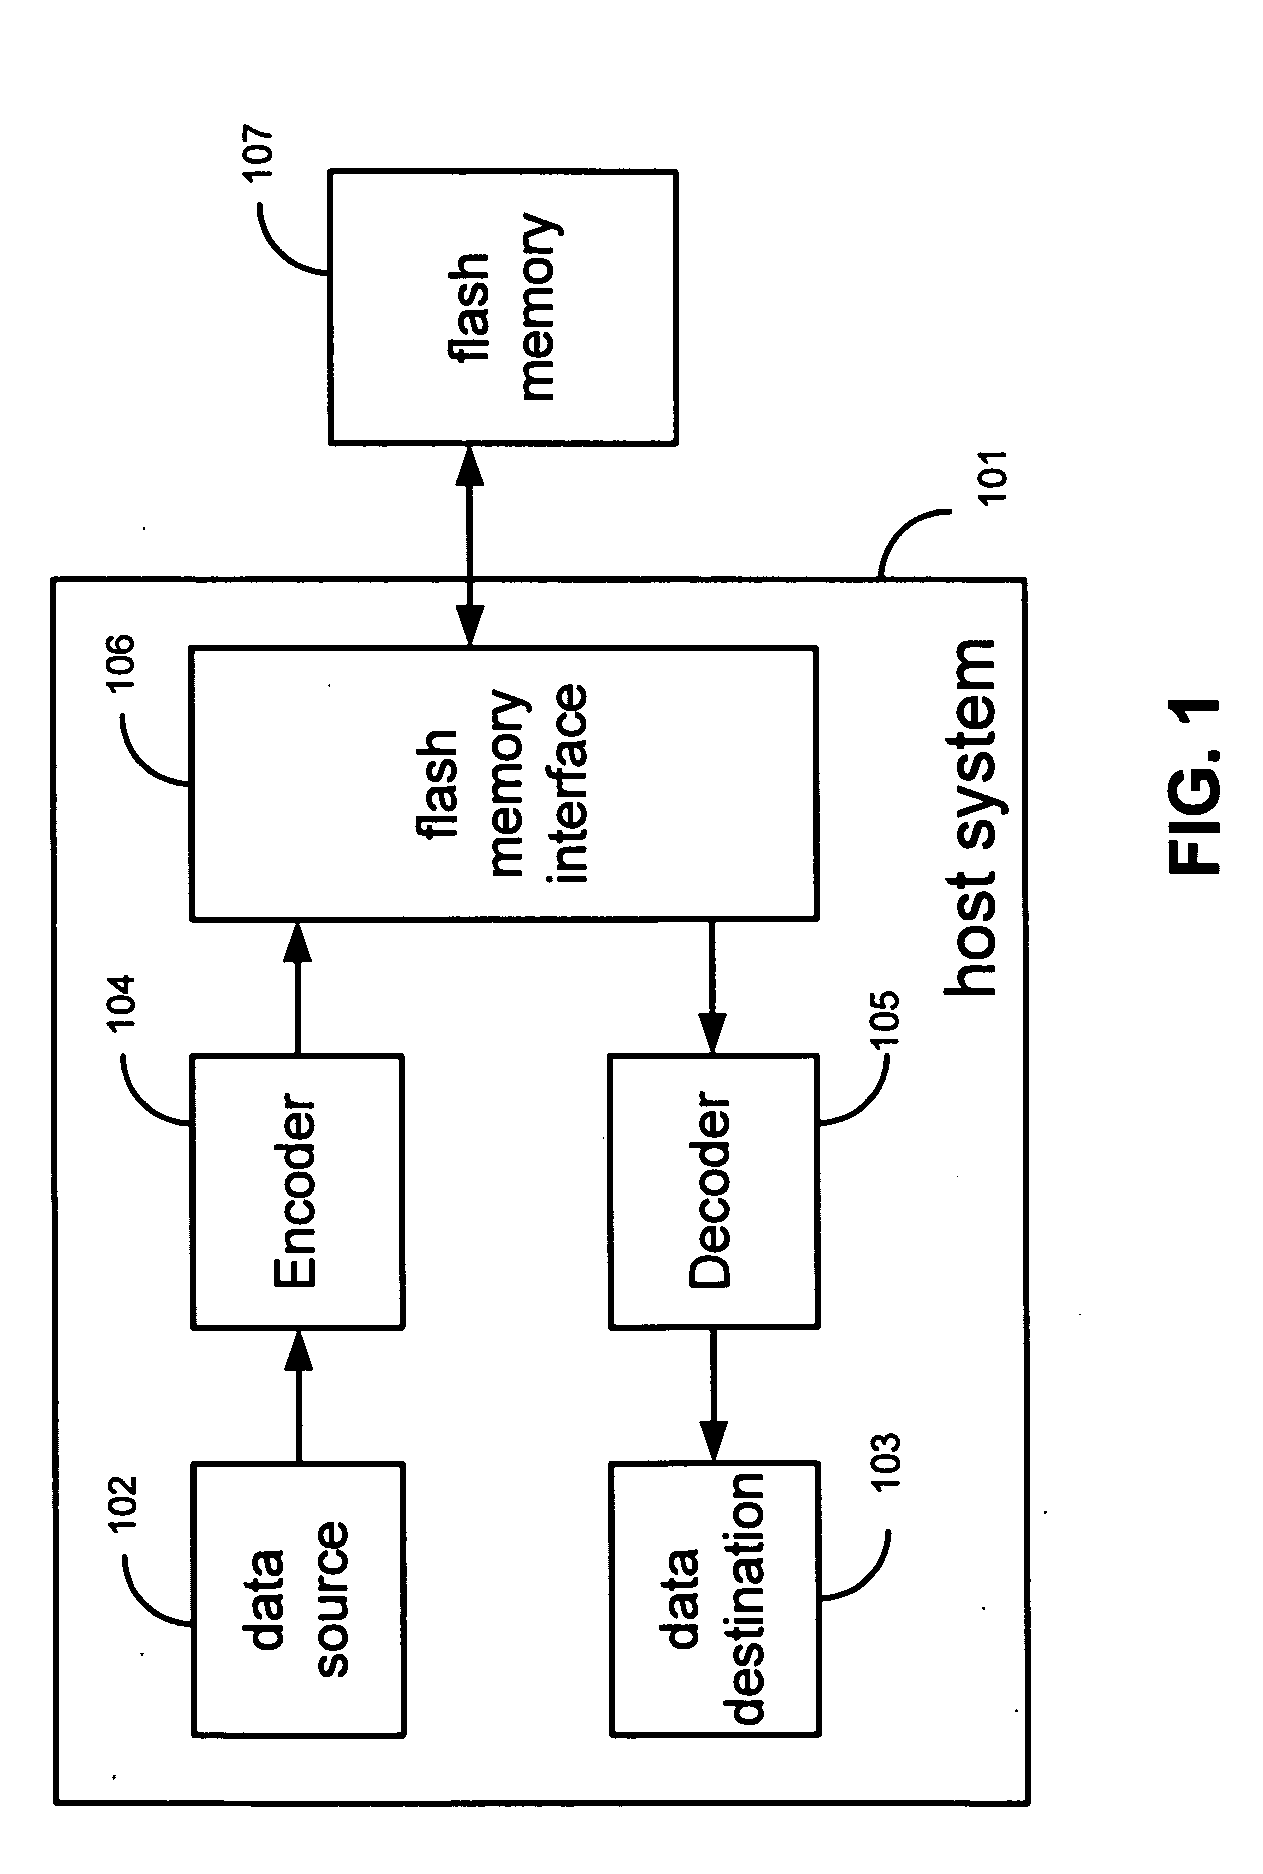 Methods and apparatus for providing error correction to unwritten pages and for identifying unwritten pages in flash memory